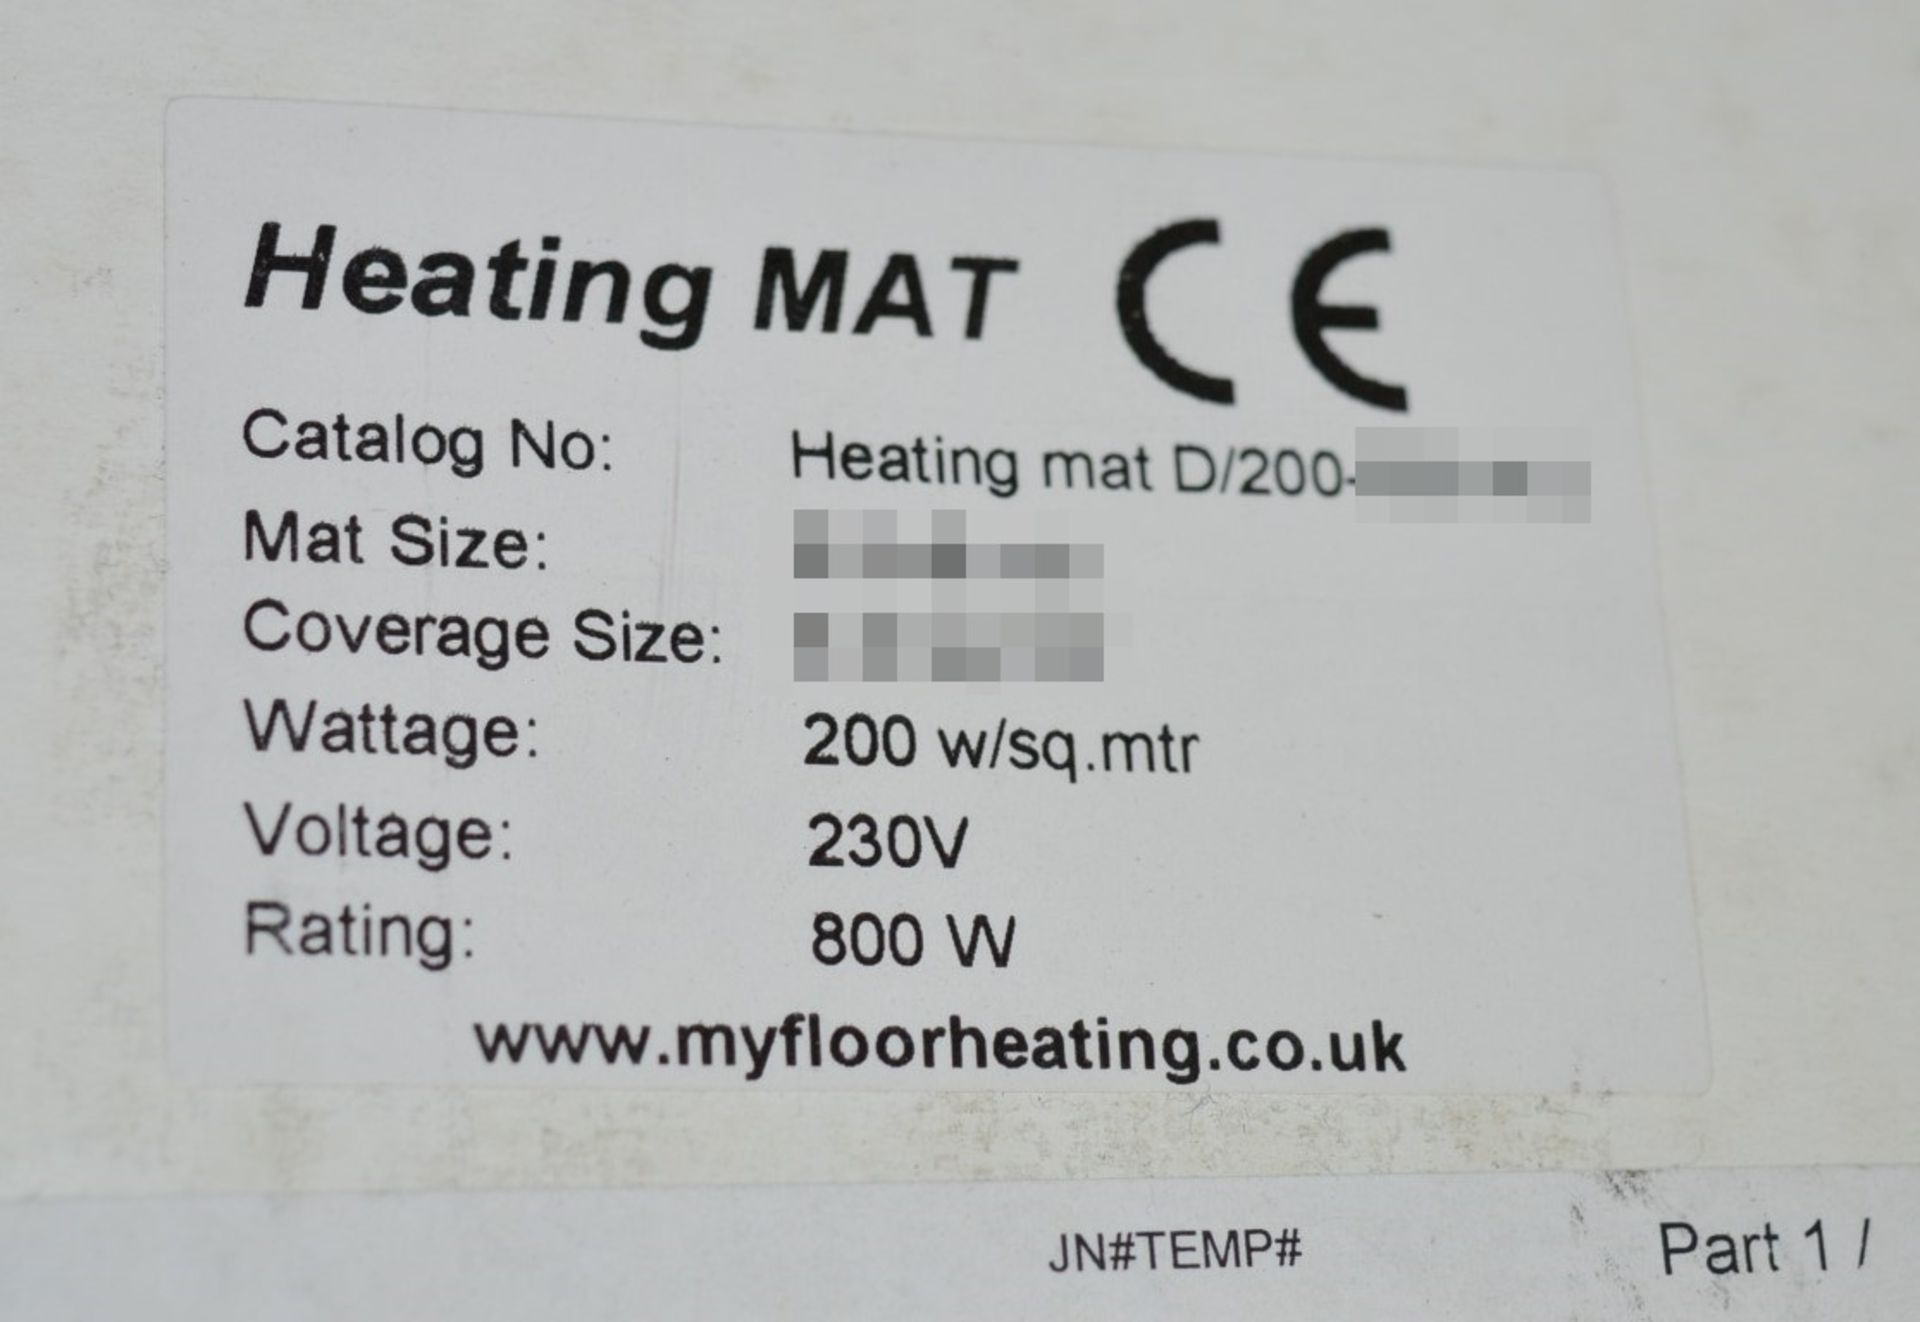 1 x Underfloor Heating System by MyFloorHeating - Covers 1.5 Square Meters - Includes 0.5 x 3m - Image 11 of 11